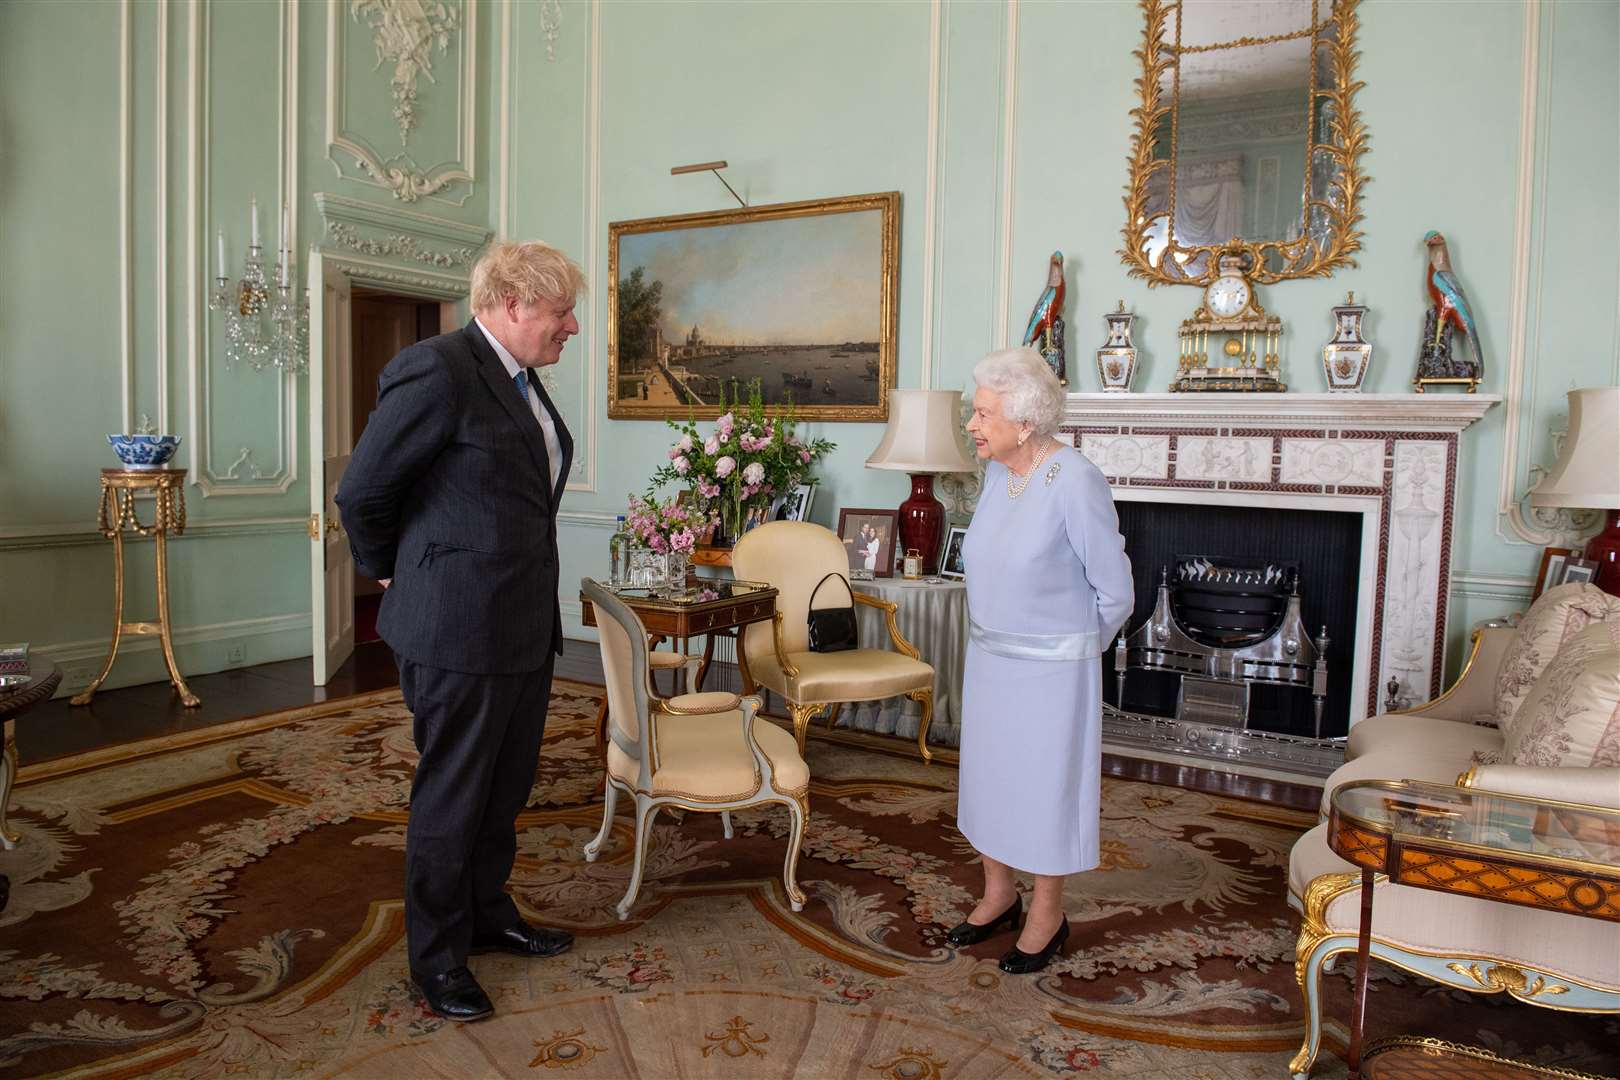 The Queen greets Boris Johnson in June 2021 in their first in-person weekly audience since the start of the coronavirus pandemic (Dominic Lipinski/PA)